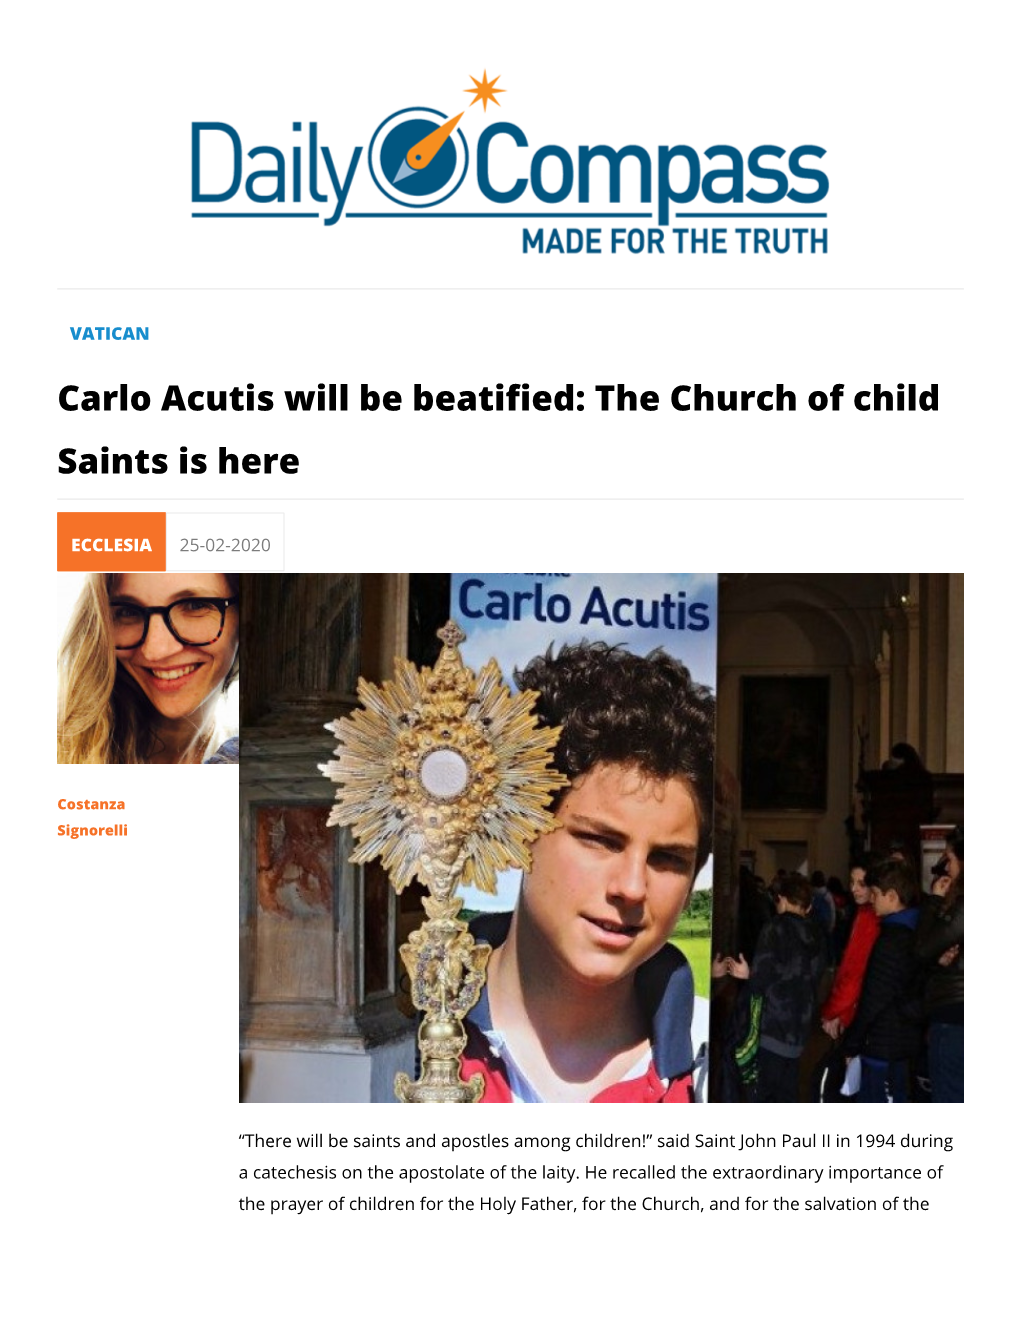 Carlo Acutis Will Be Beatified: the Church of Child Saints Is Here